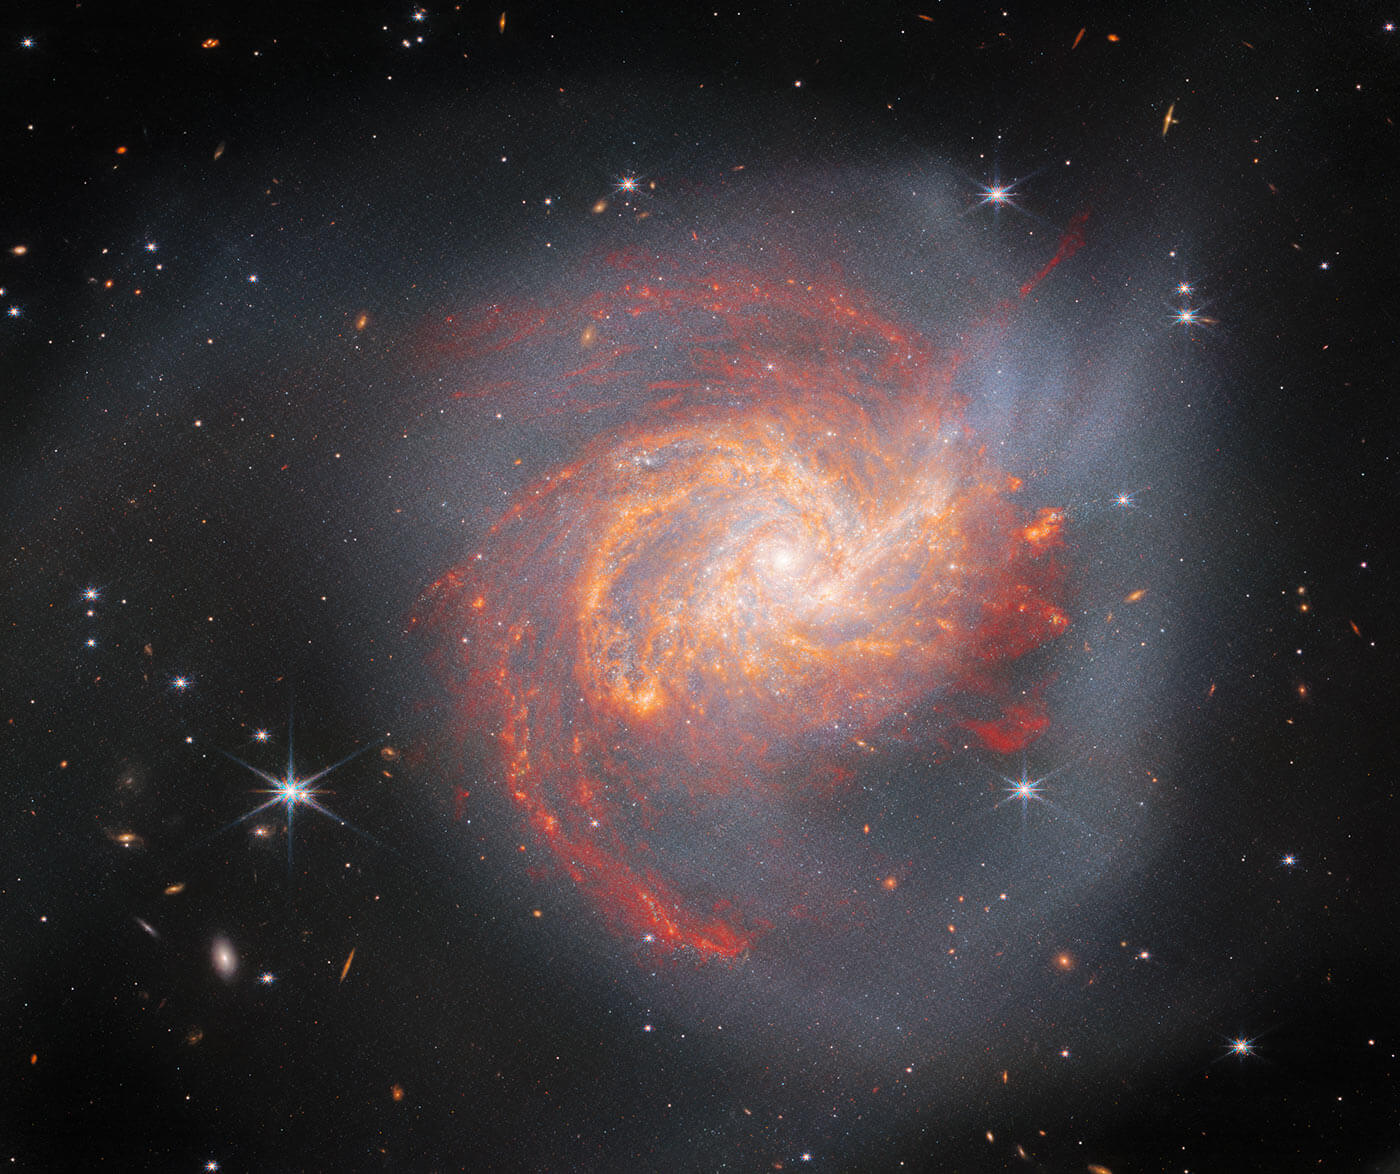 NGC 3256, the result of two galaxies crashing into each other